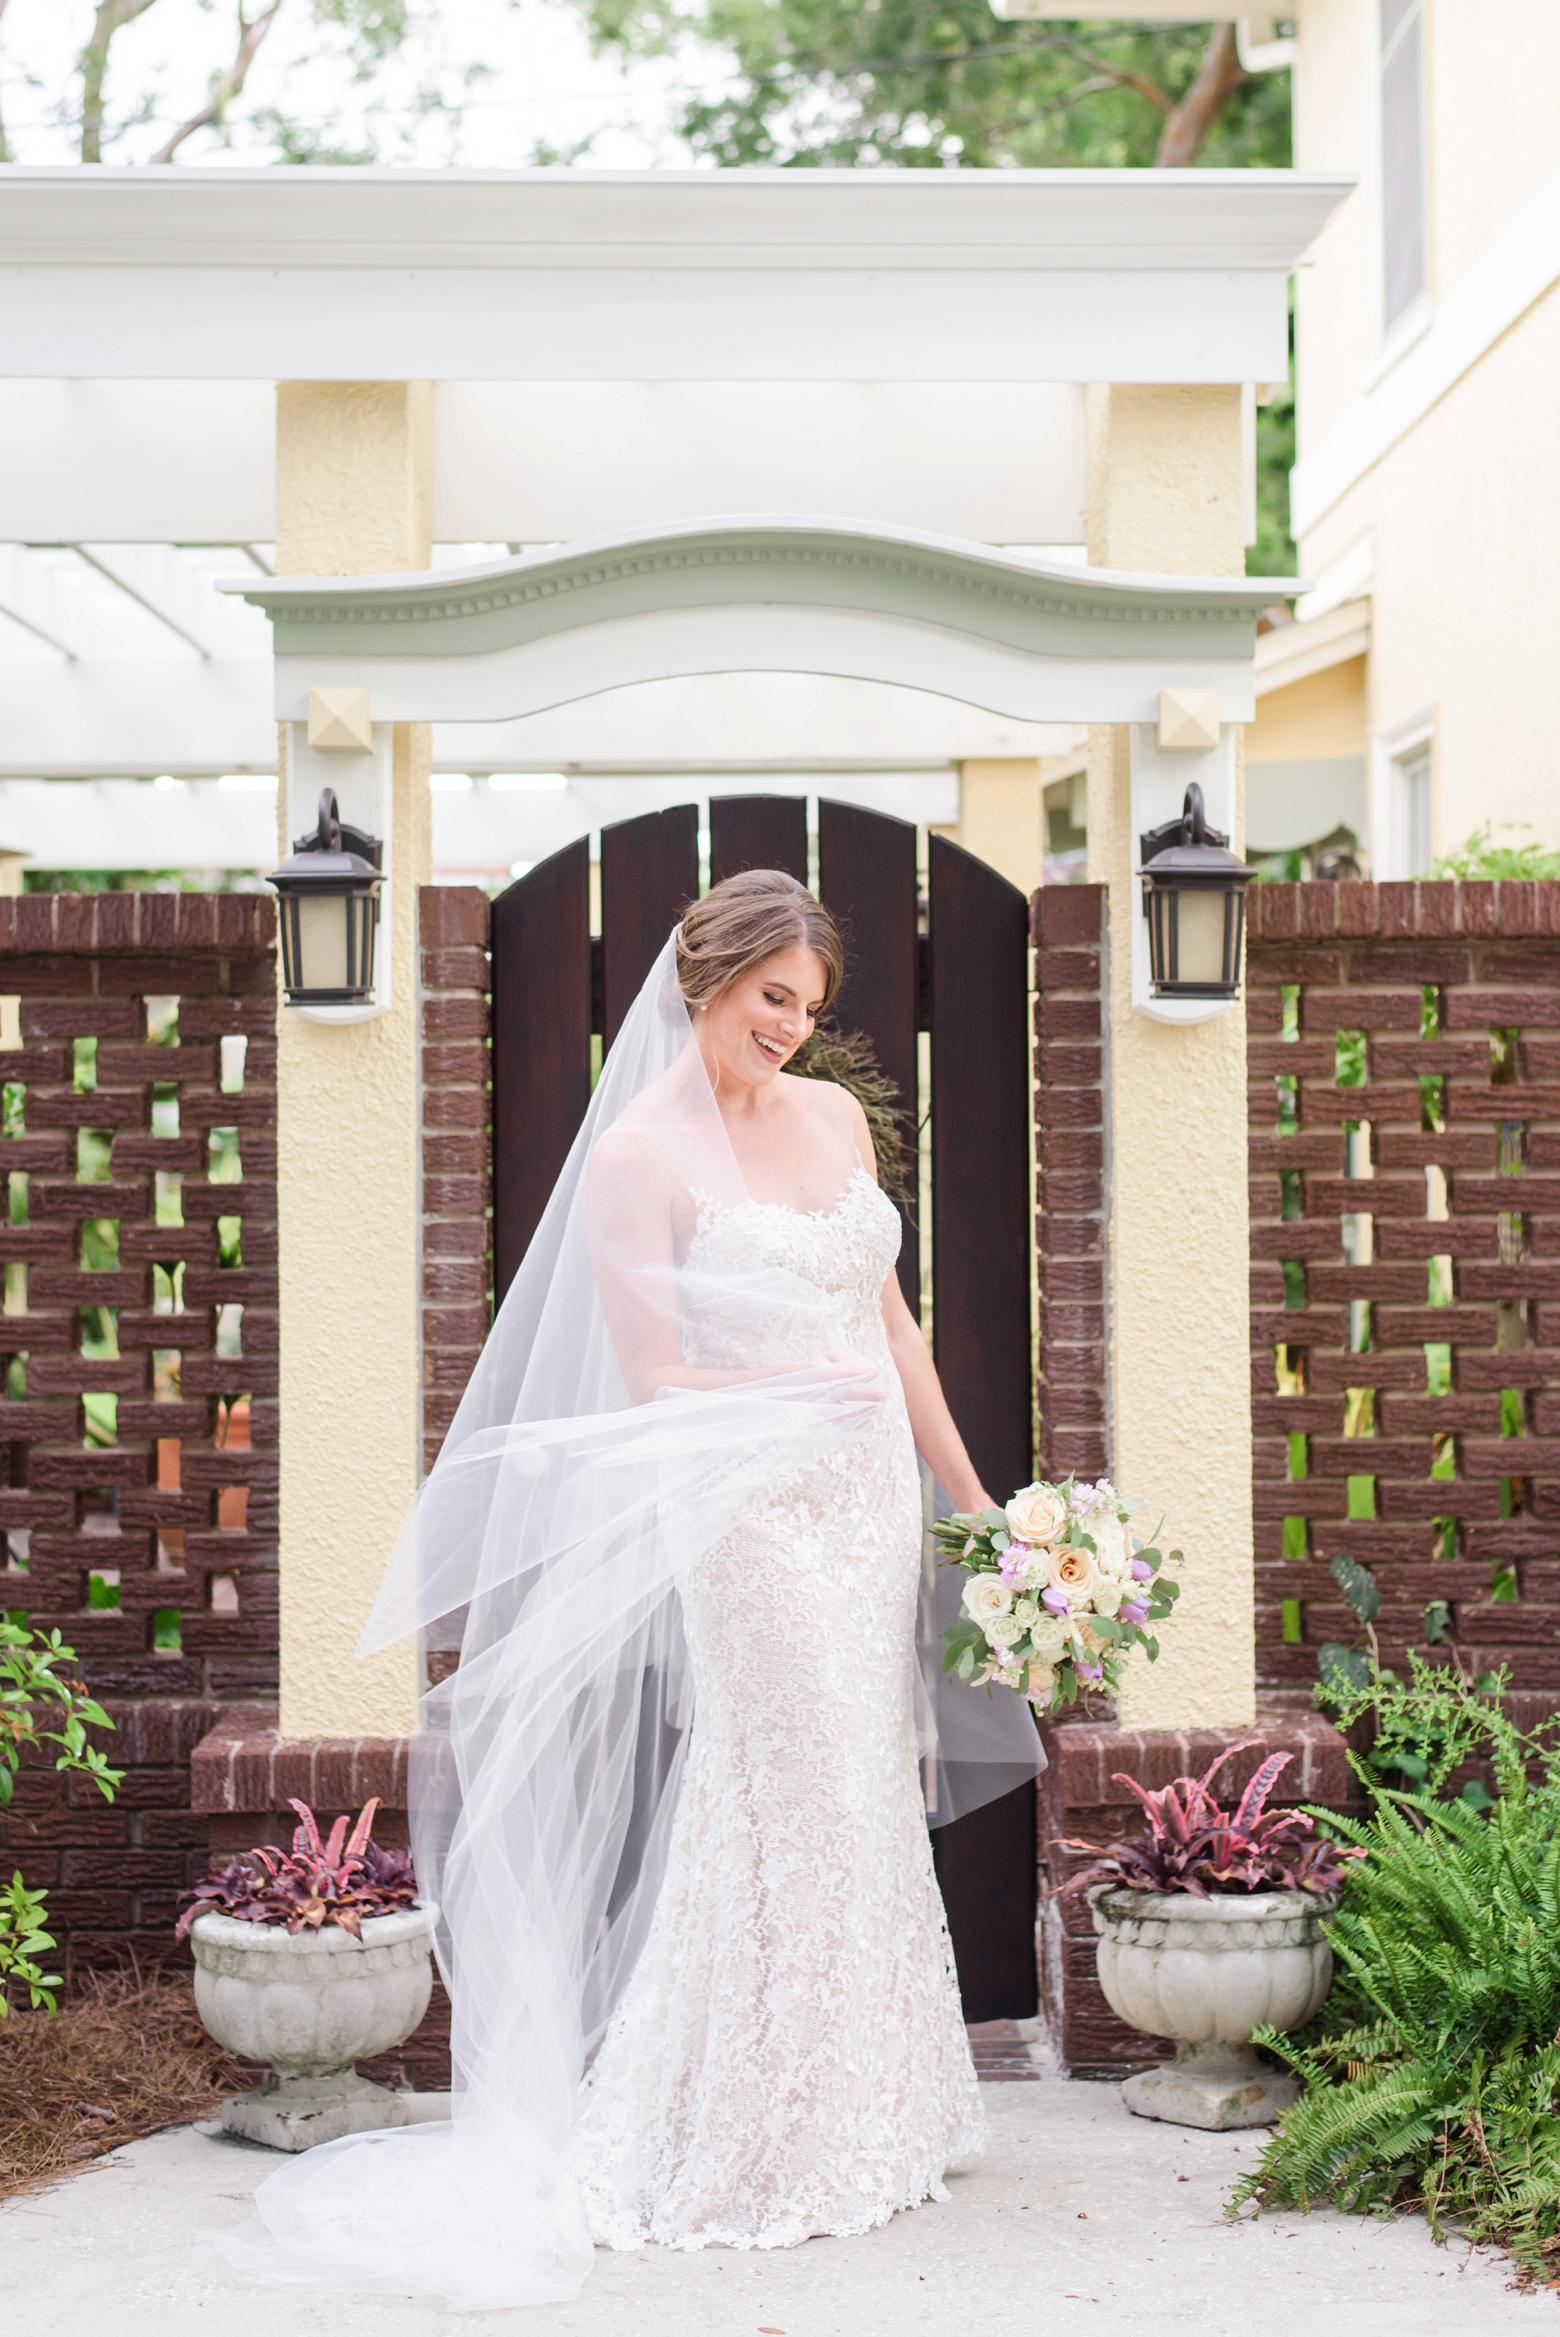 Bride twirls her wedding gown and veil in front of a gate